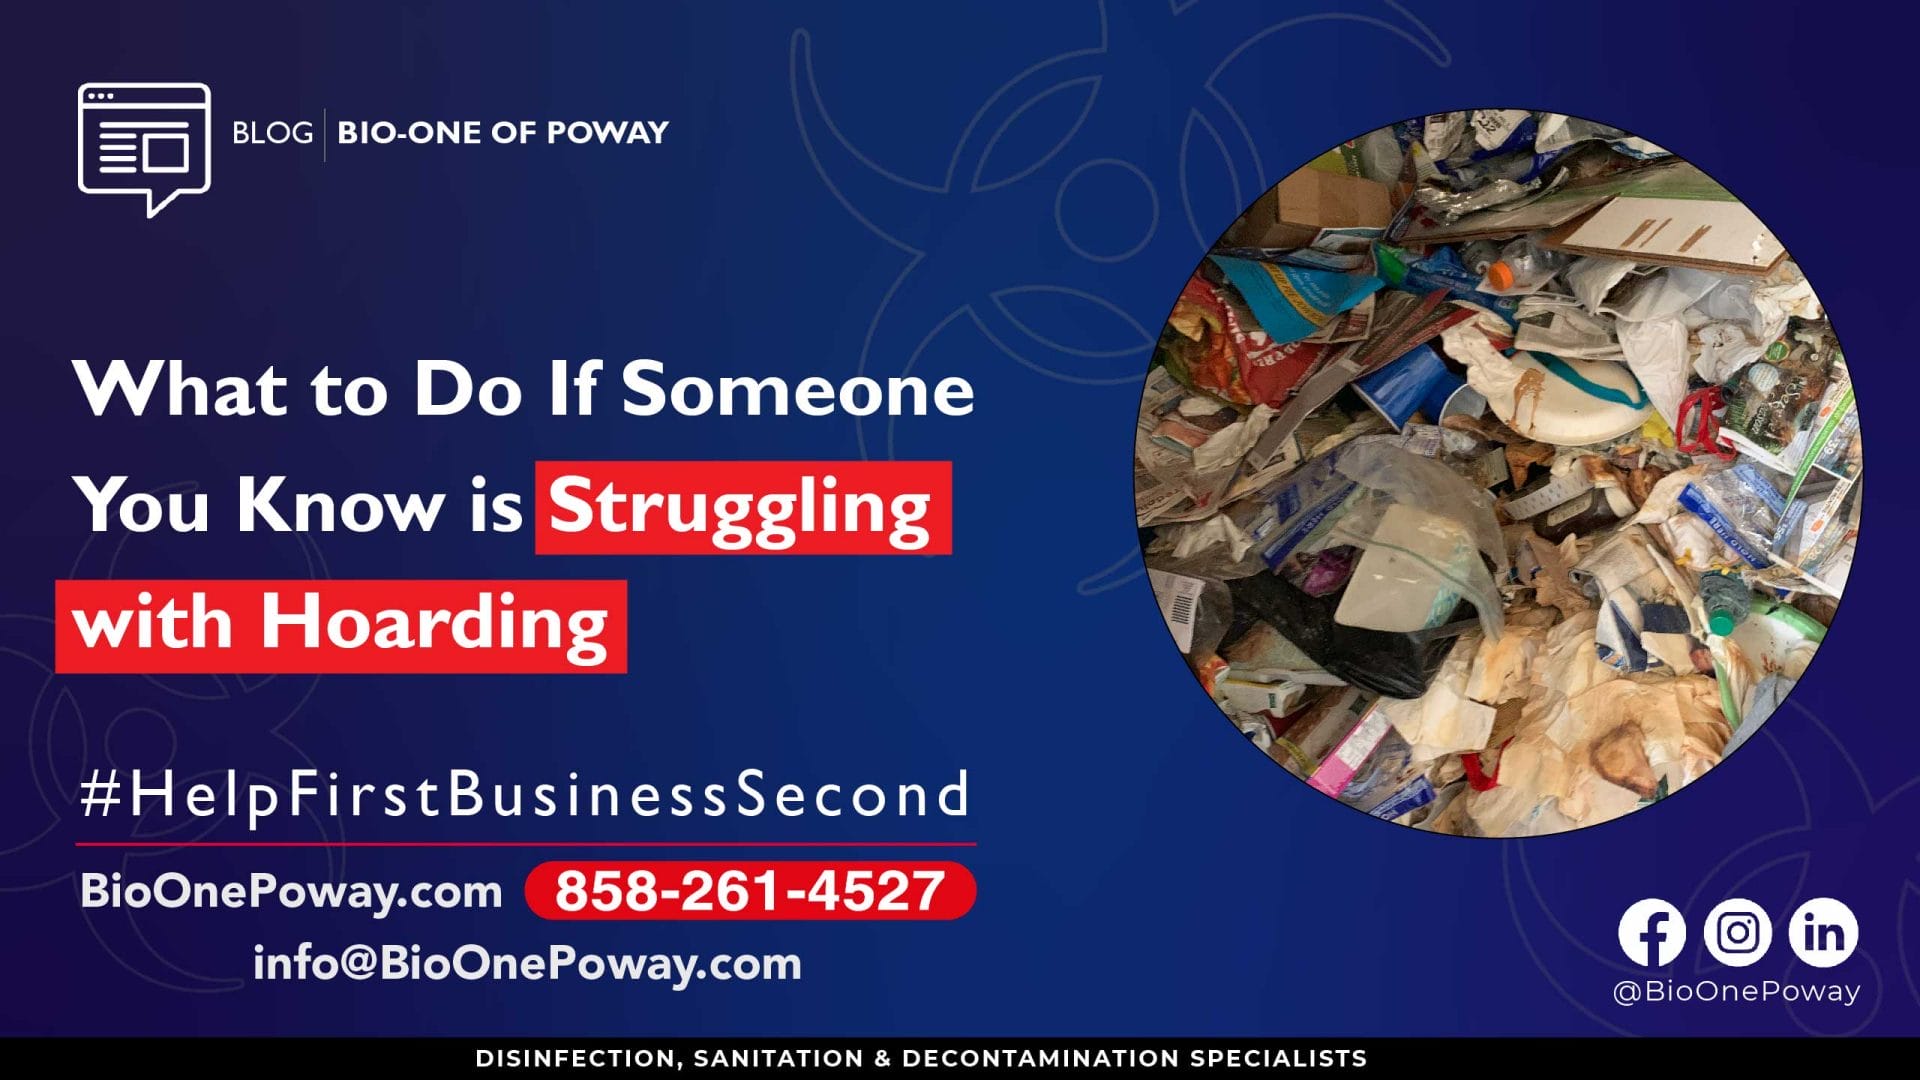 What to Do If Someone You Know is Struggling with Hoarding